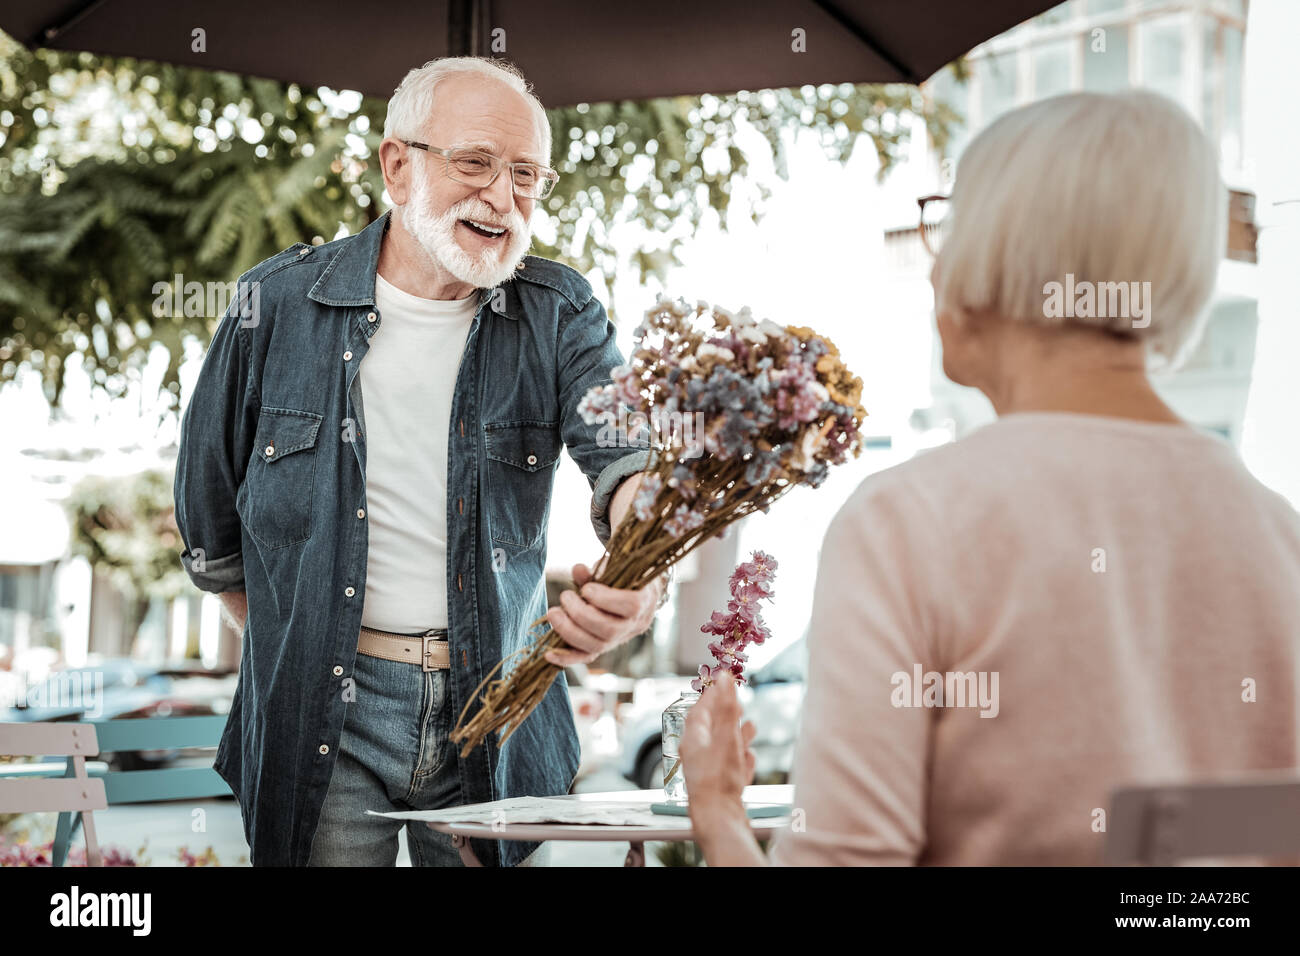 Joyful delighted man giving flowers to an elderly woman Stock Photo